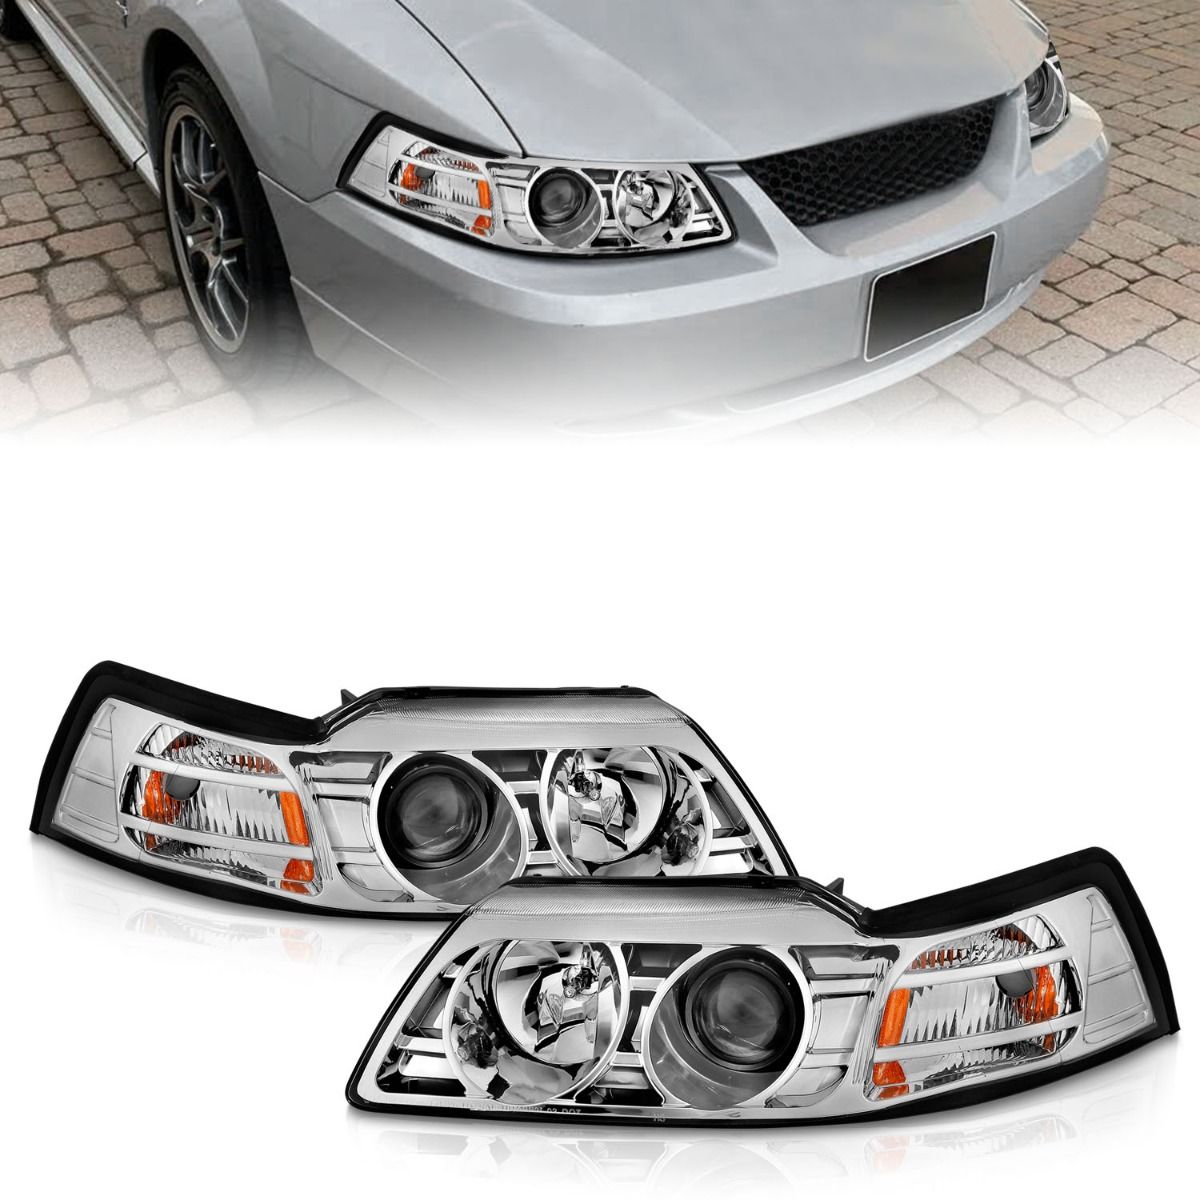 FORD PROJECTOR HEADLIGHTS, FORD MUSTANG HEADLIGHTS, FORD 99-04 HEADLIGHTS, PROJECTOR HEADLIGHTS, CHROME HOUSING, Anzo HEADLIGHTS